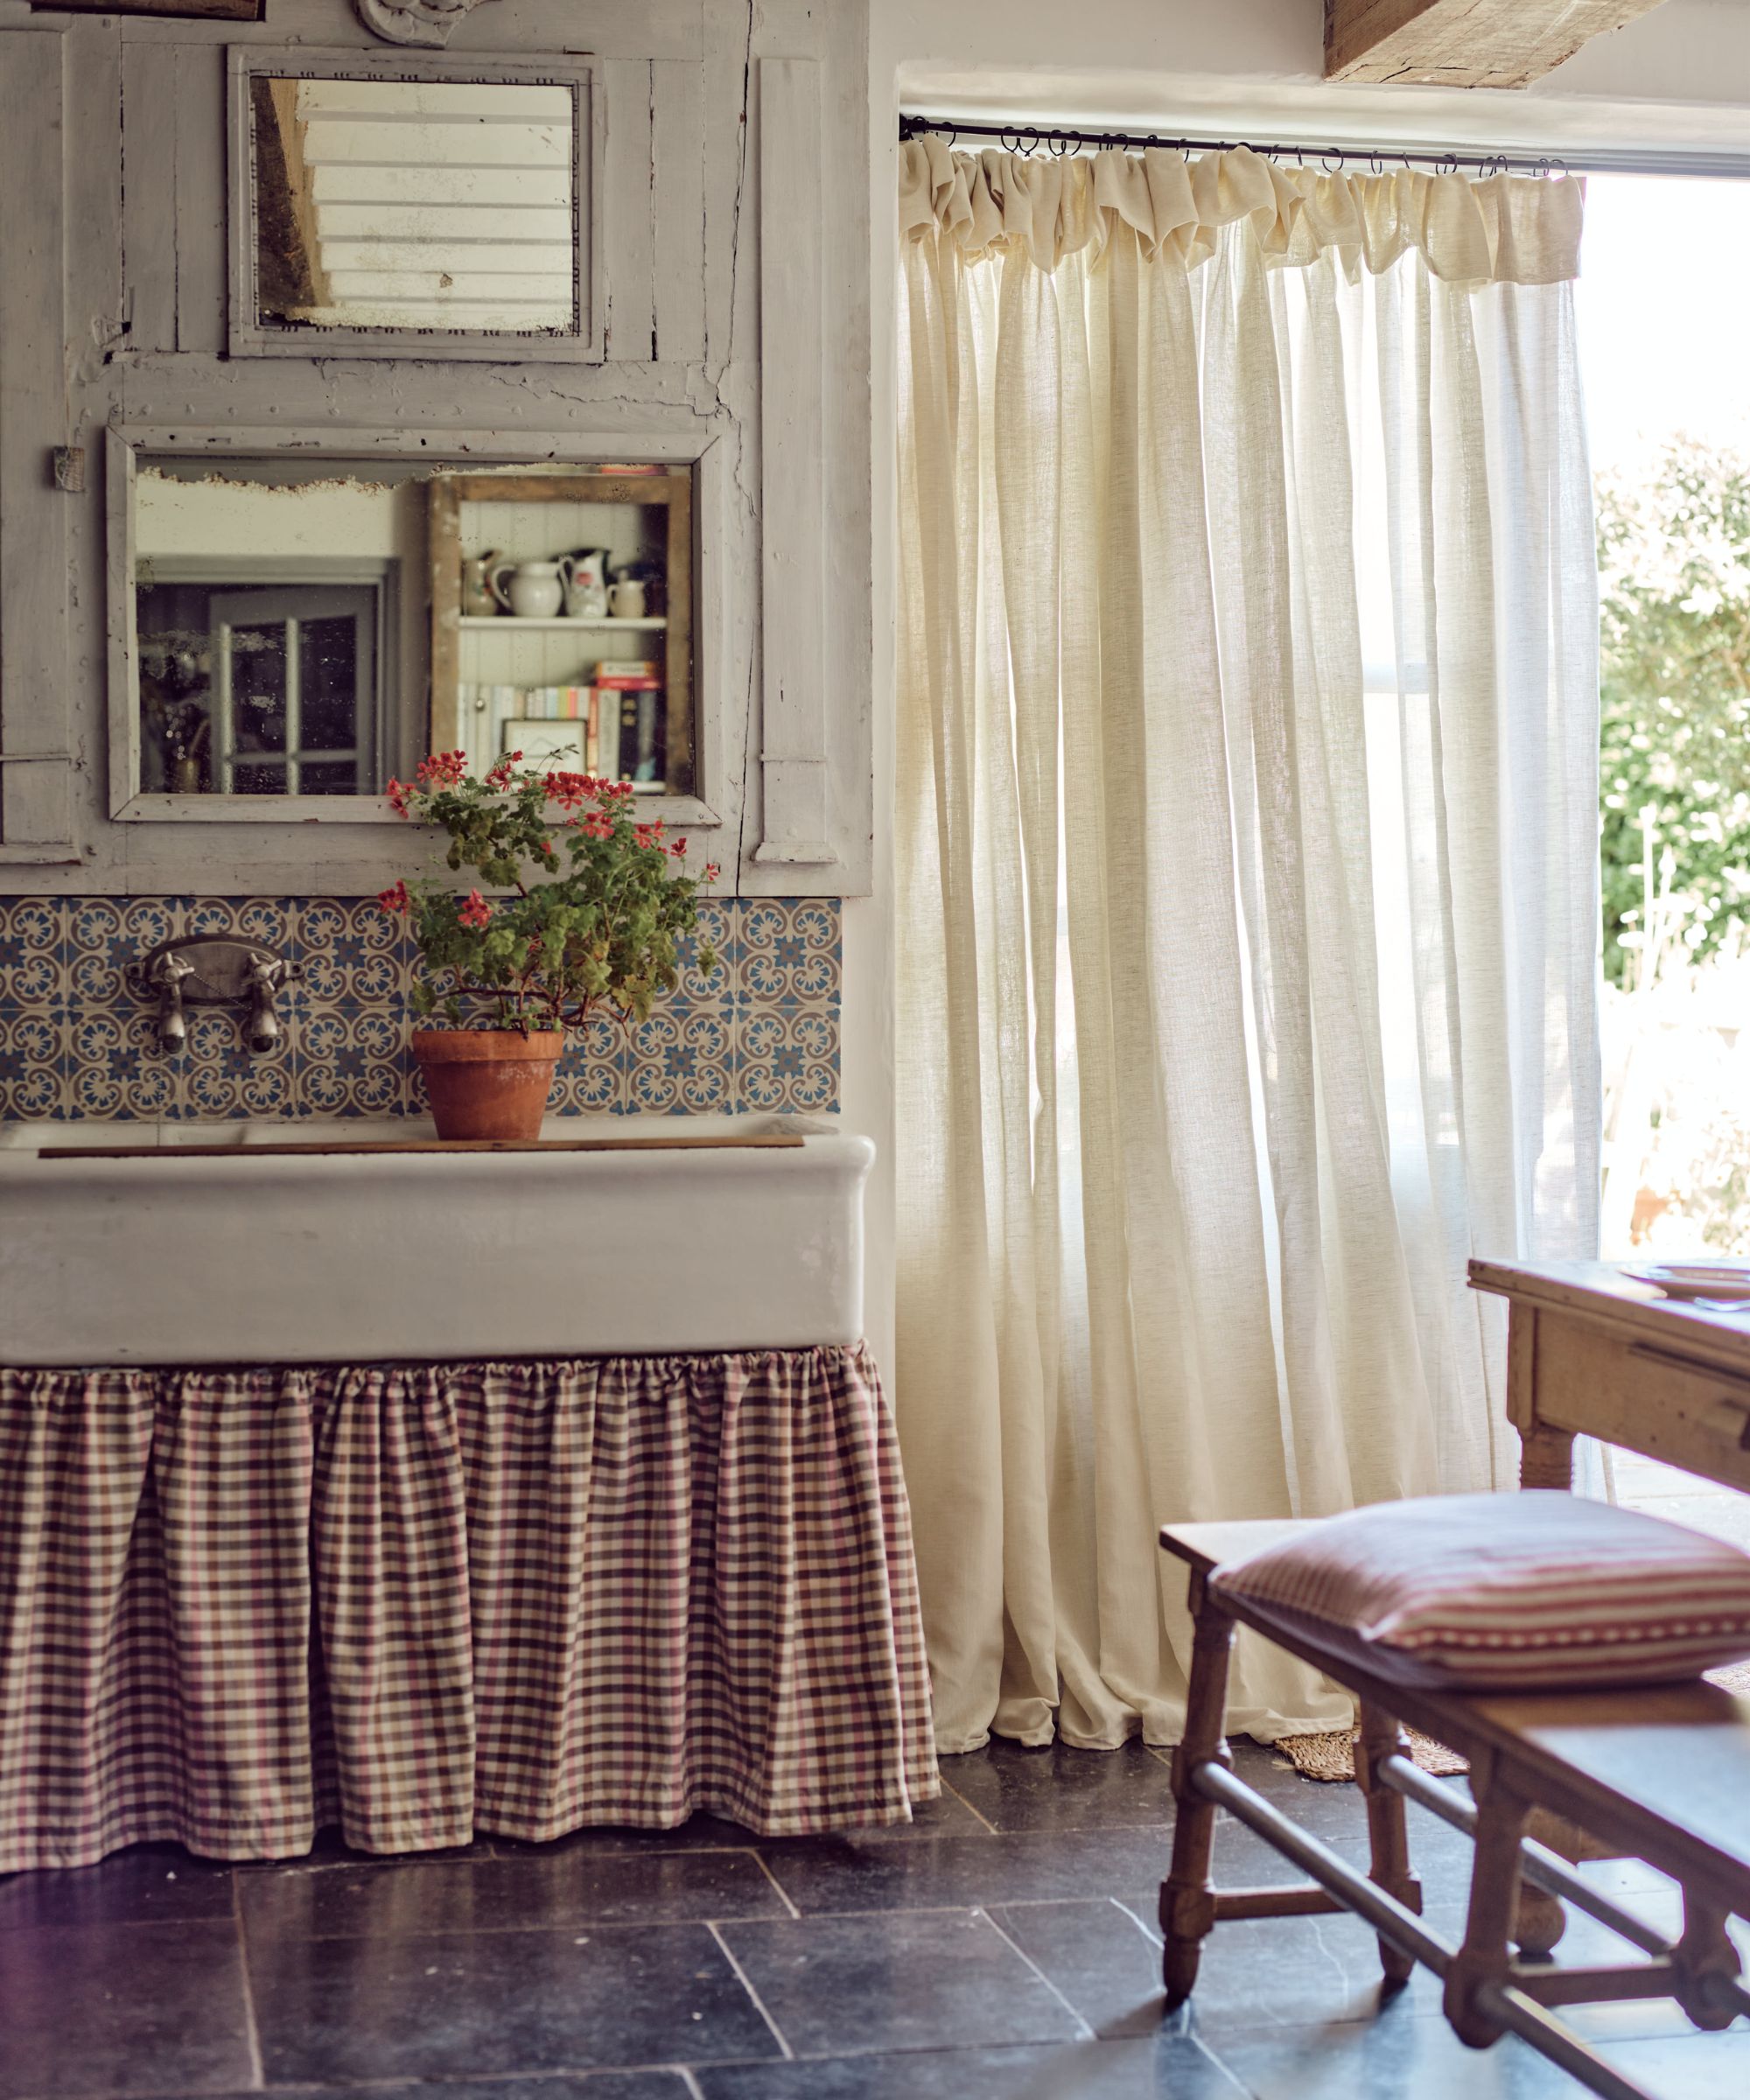 Rustic kitchen with vintage sink, fabric sink curtain and cream linen french door curtains